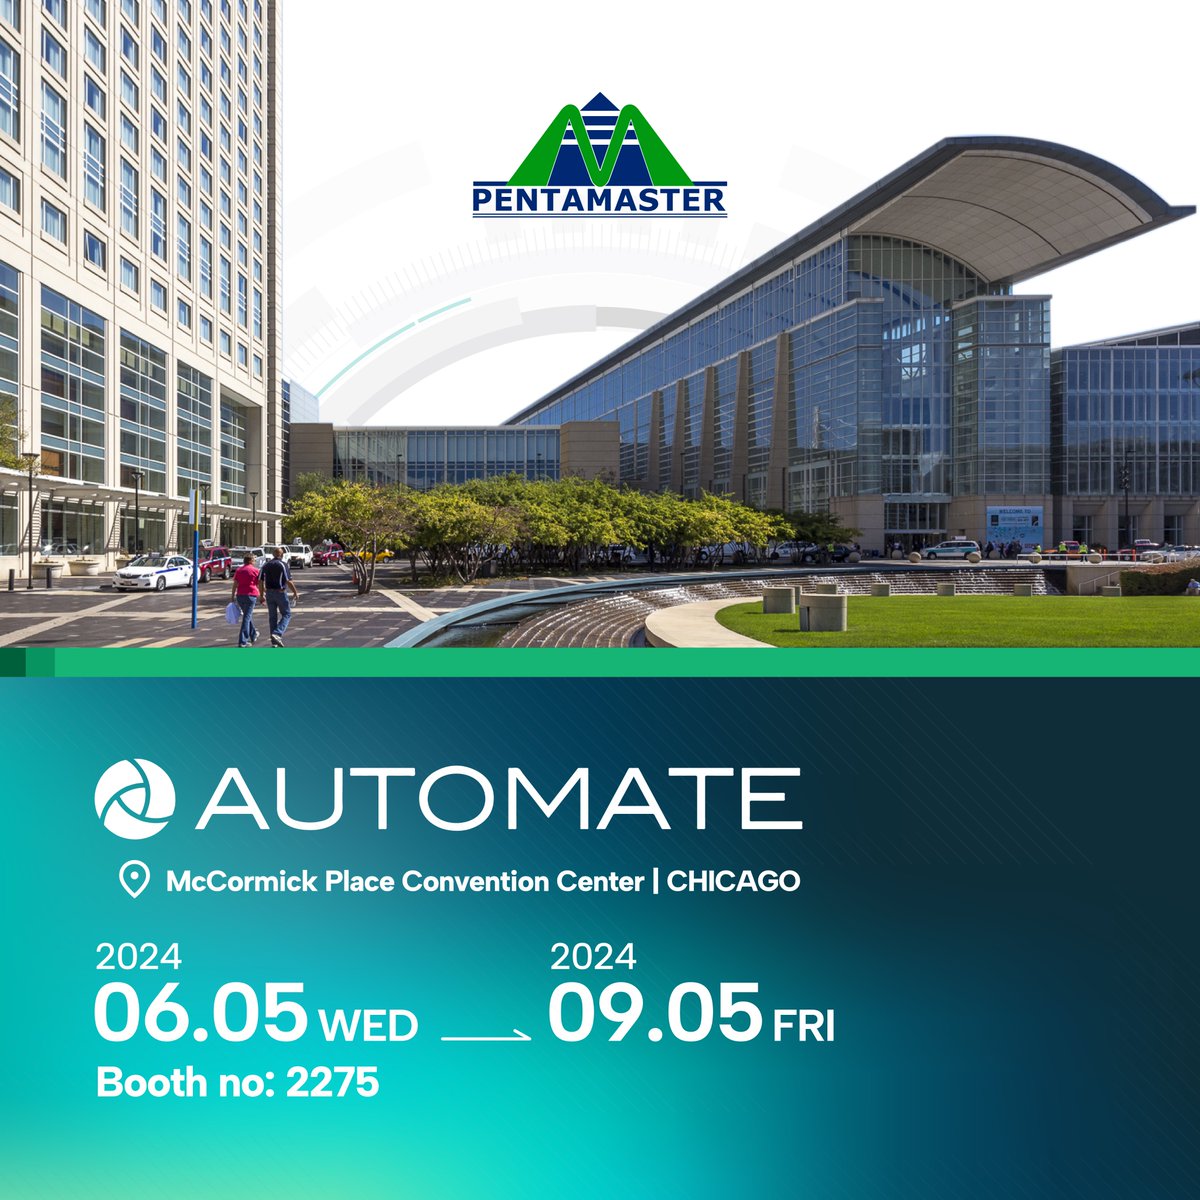 This May, join us in Automate 2024 to explore the advanced factory automation solutions designed to transform your manufacturing processes 🏭 

#Automate2024 #automationsolutions #manufacturing #technology #innovation #factoryautomation #industry #Pentamaster